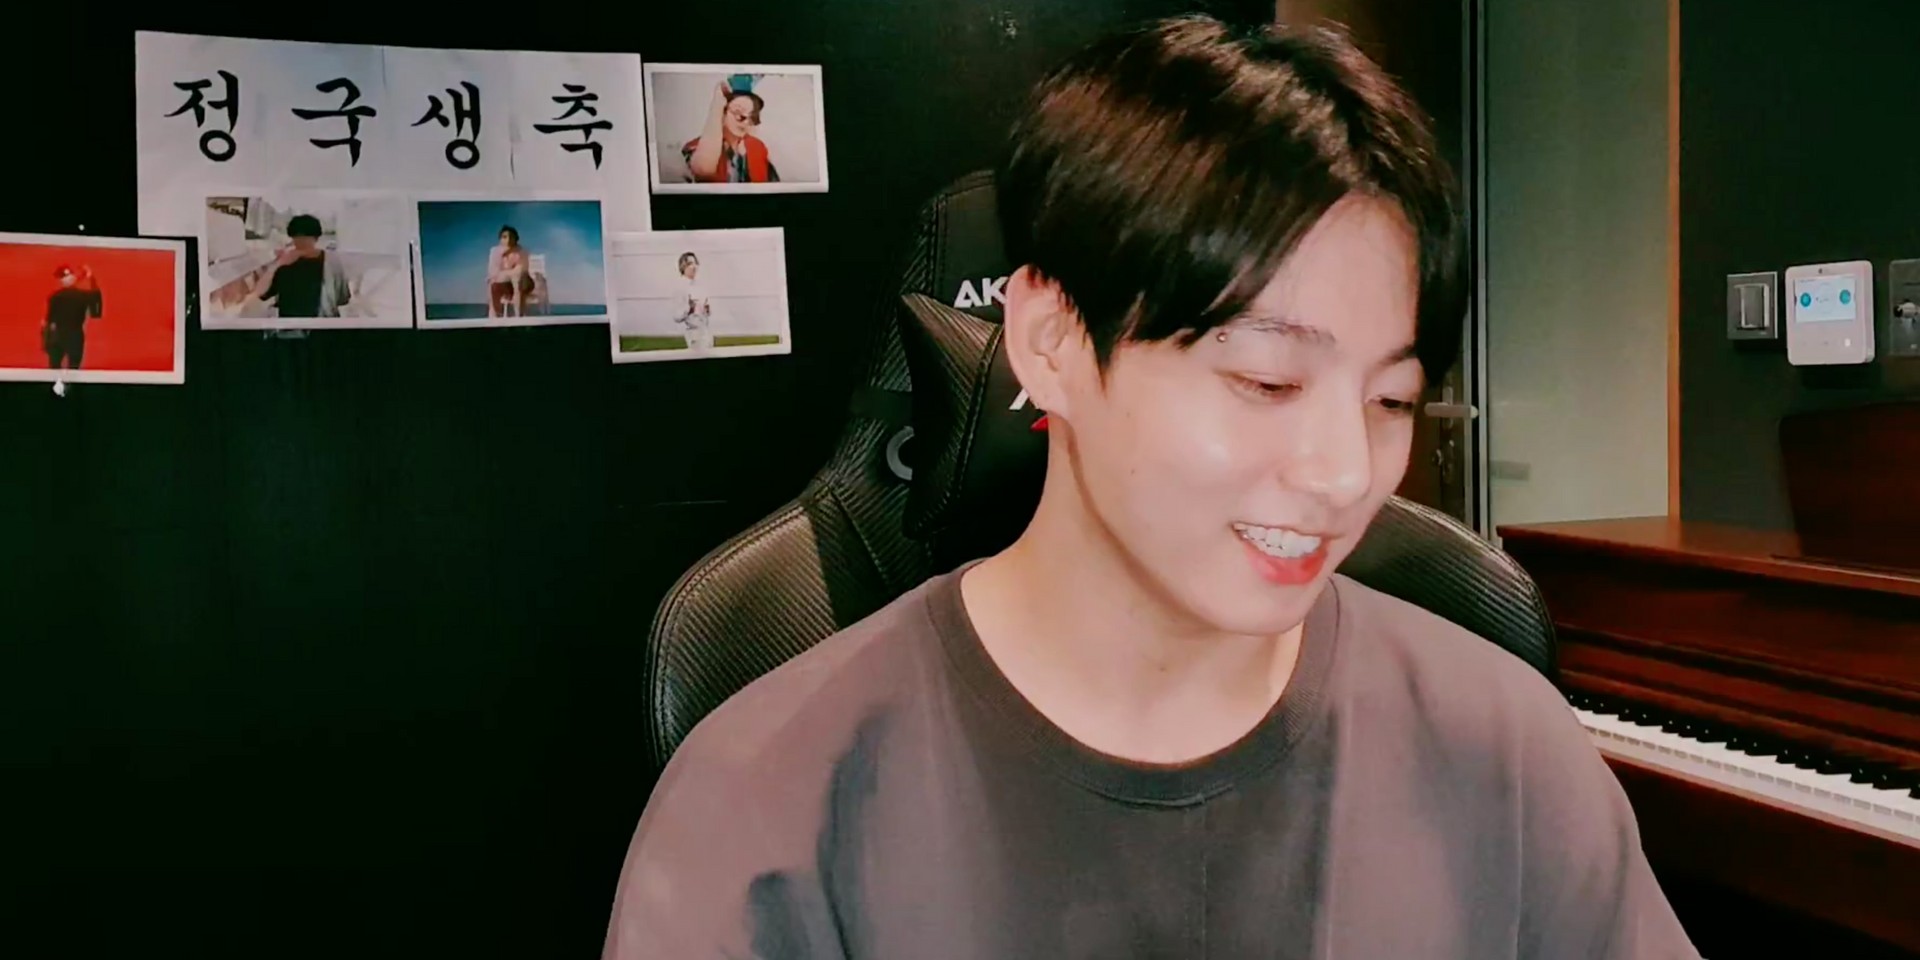 BTS' Jungkook composes and arranges songs with ARMY comments as lyrics for birthday countdown – watch